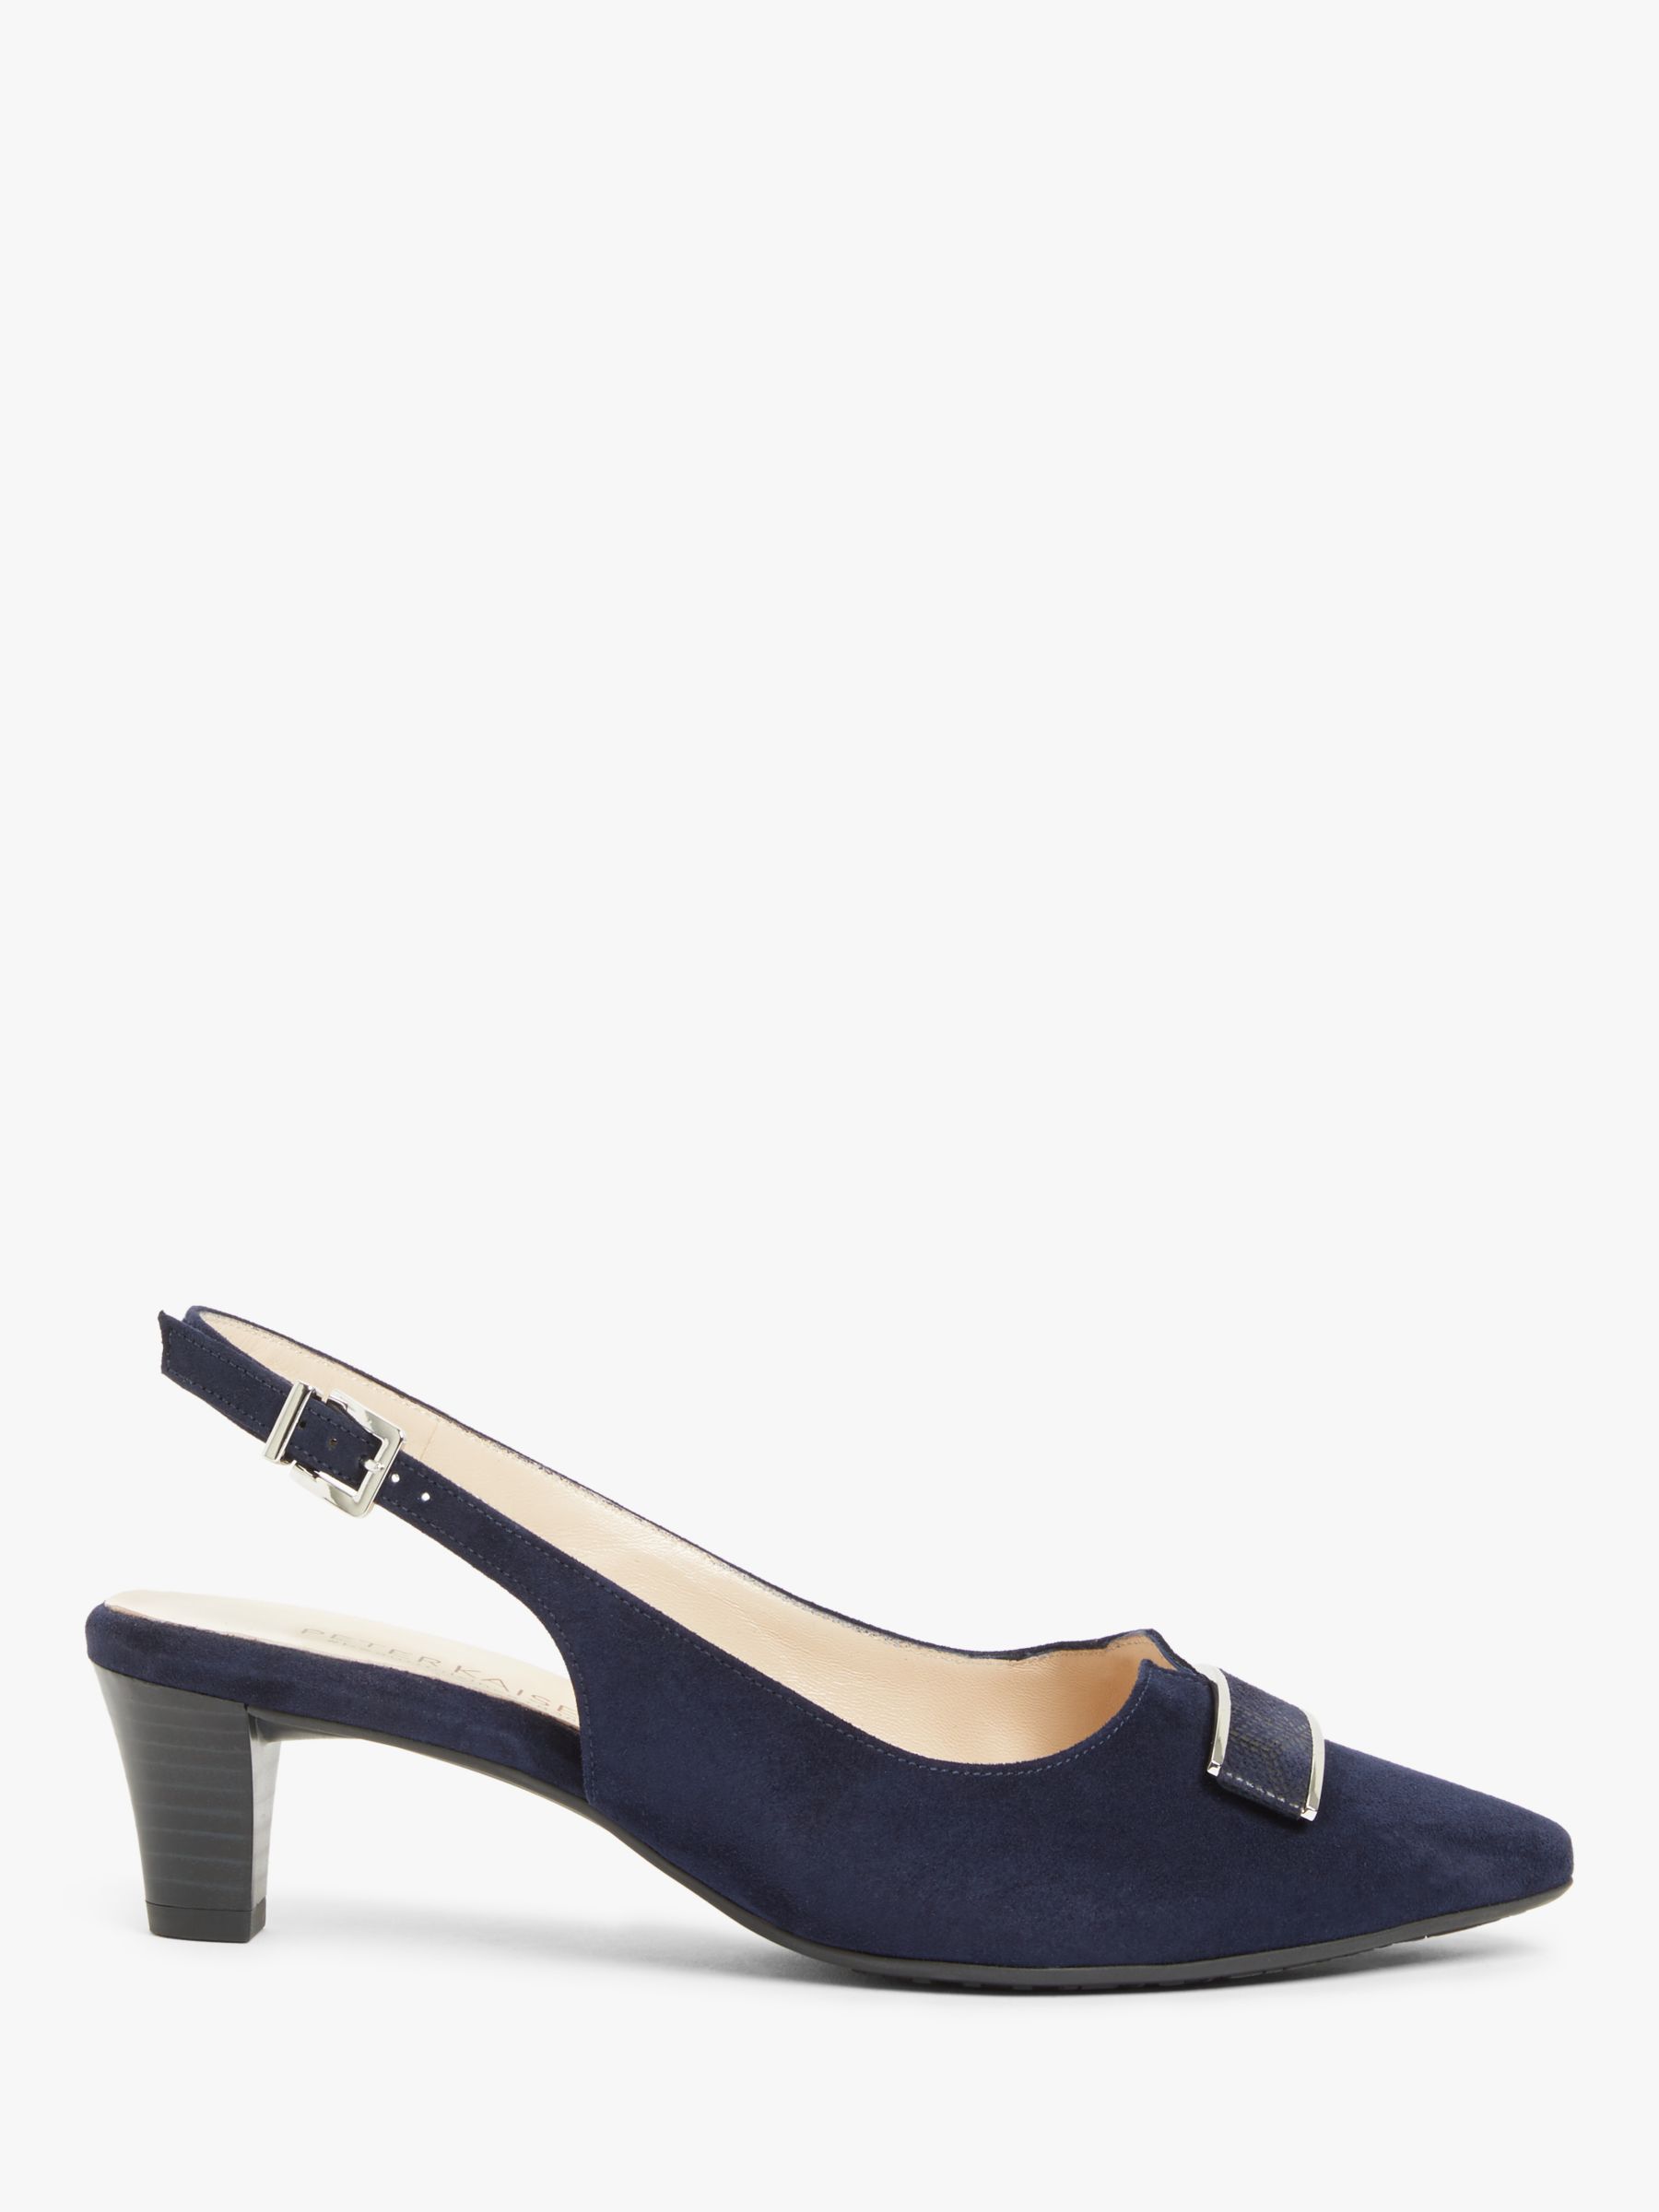 Peter Kaiser Isari Suede Slingback Court Shoes at John Lewis & Partners